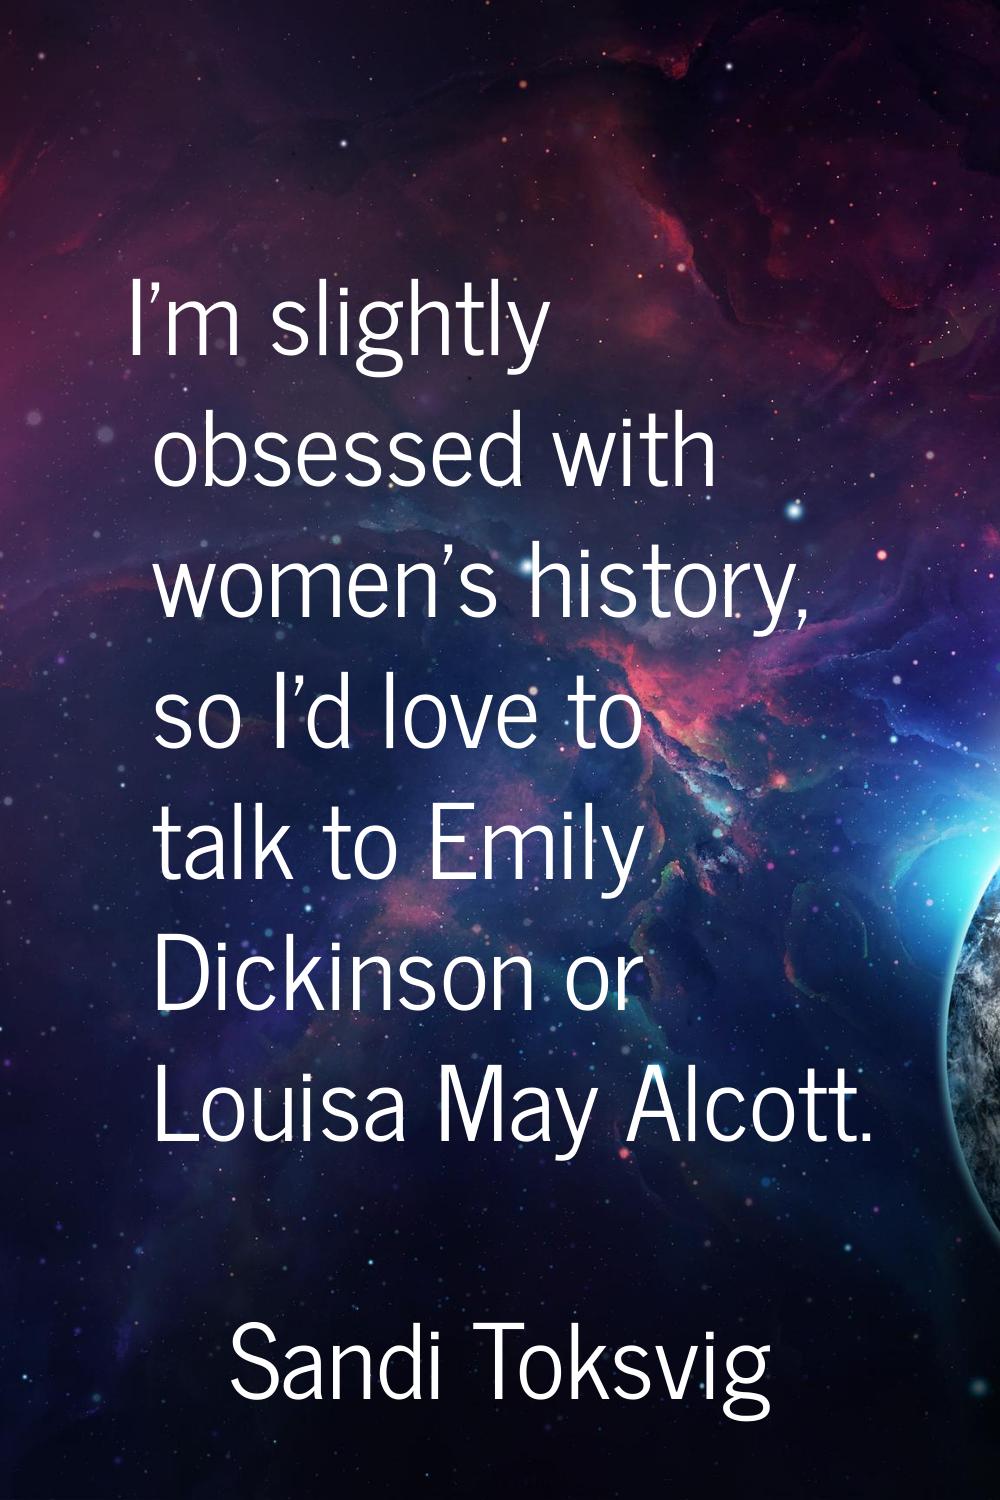 I'm slightly obsessed with women's history, so I'd love to talk to Emily Dickinson or Louisa May Al